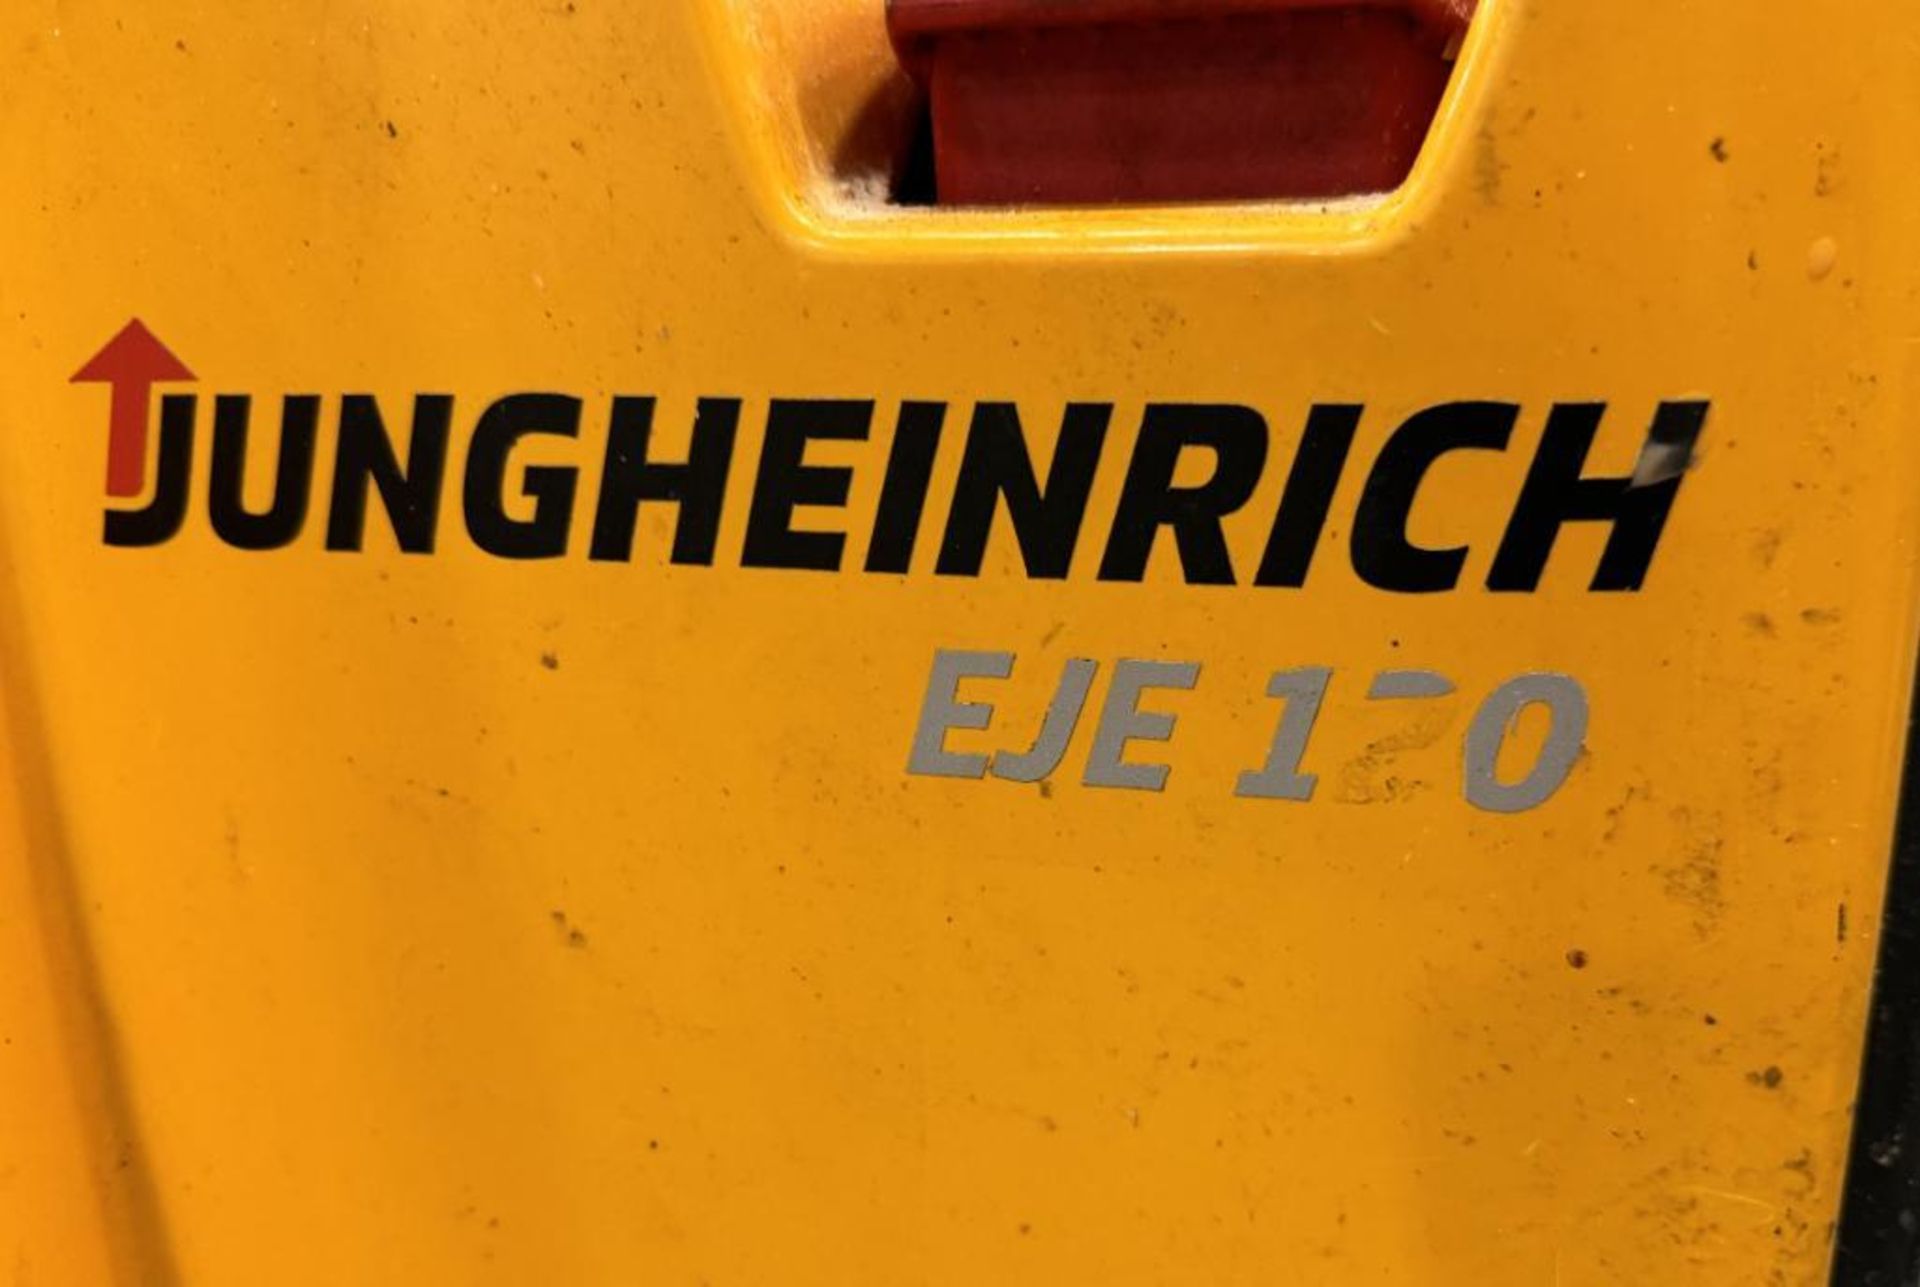 Jungheinrich Approximate 4500 Pound Electric Pallet Jack, Model EJE120, Serial# 98087076. - Image 6 of 6